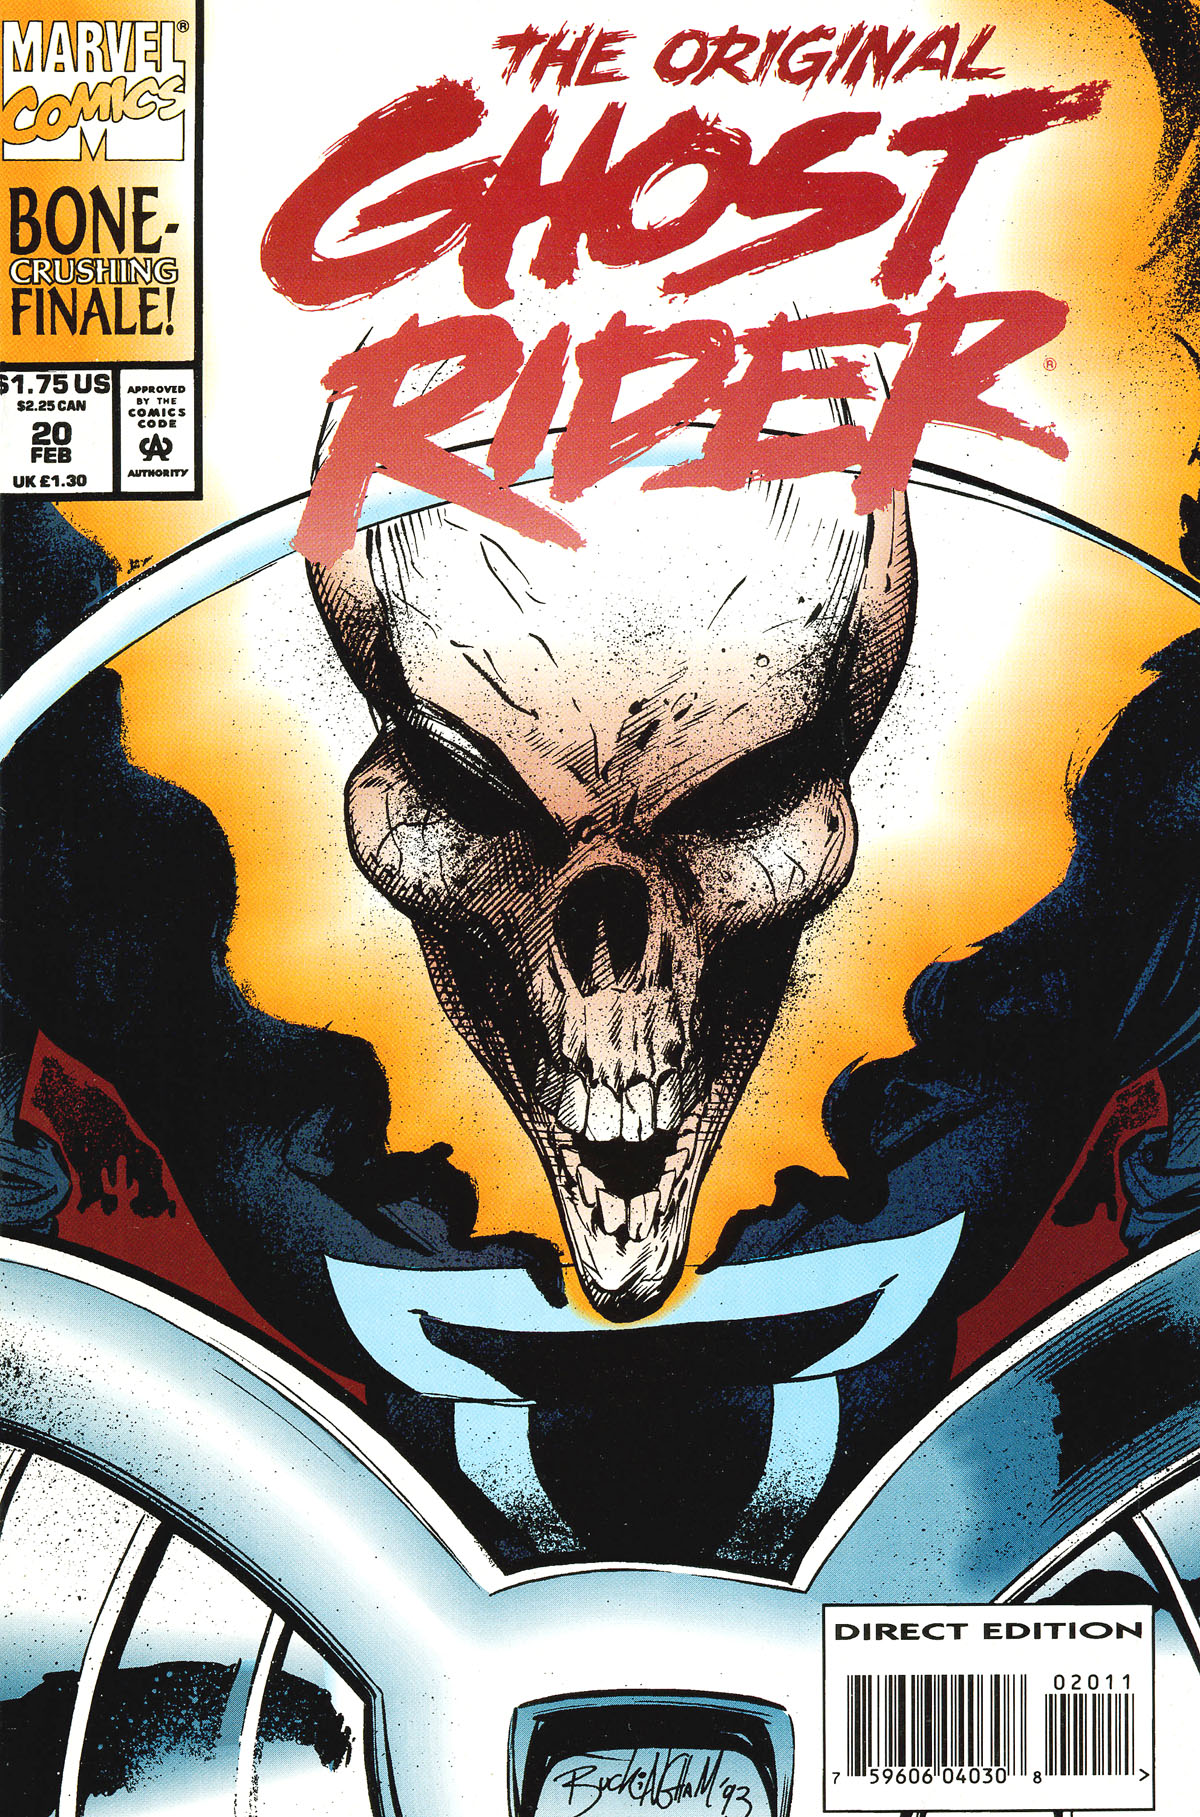 Read online The Original Ghost Rider comic -  Issue #20 - 1